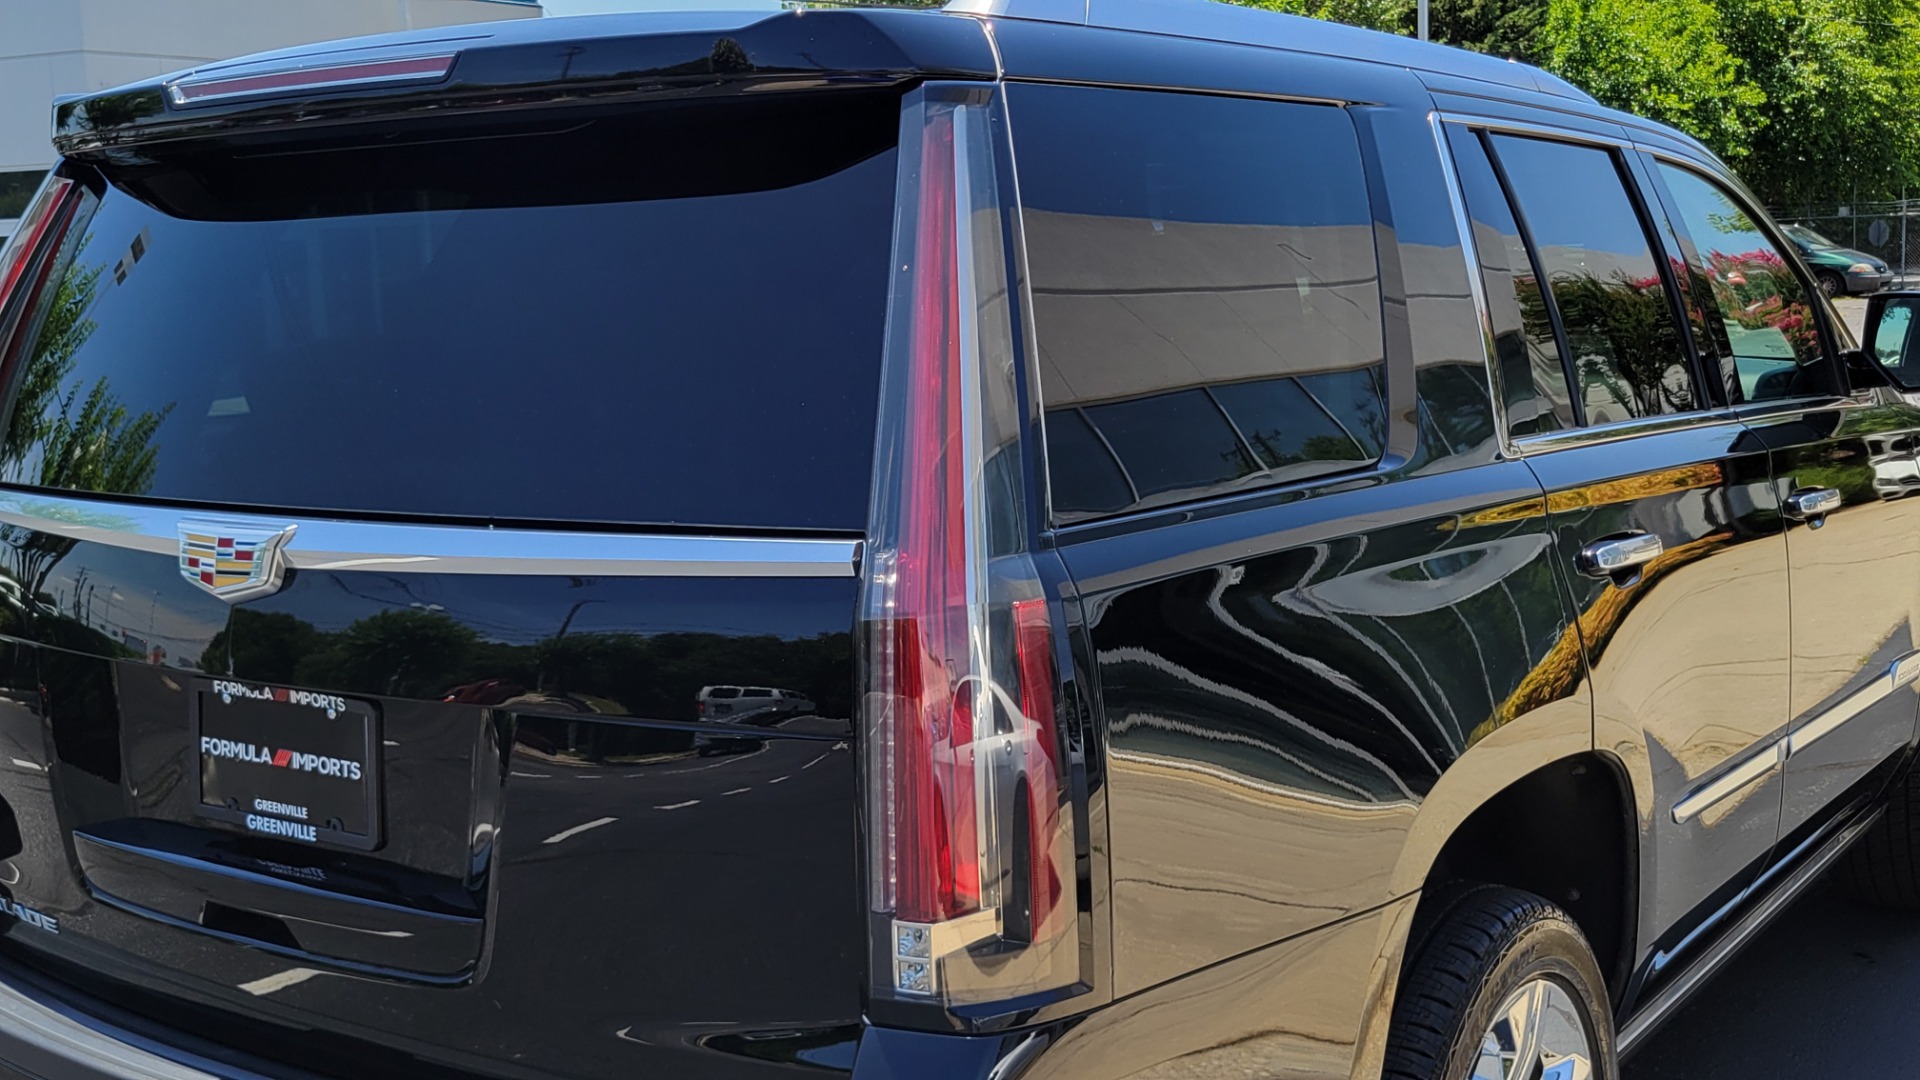 Used 2016 Cadillac ESCALADE PREMIUM COLLECTION / 6.2L / 4X4 / NAV / DVD / SUNROOF / 3-ROW for sale $58,995 at Formula Imports in Charlotte NC 28227 35